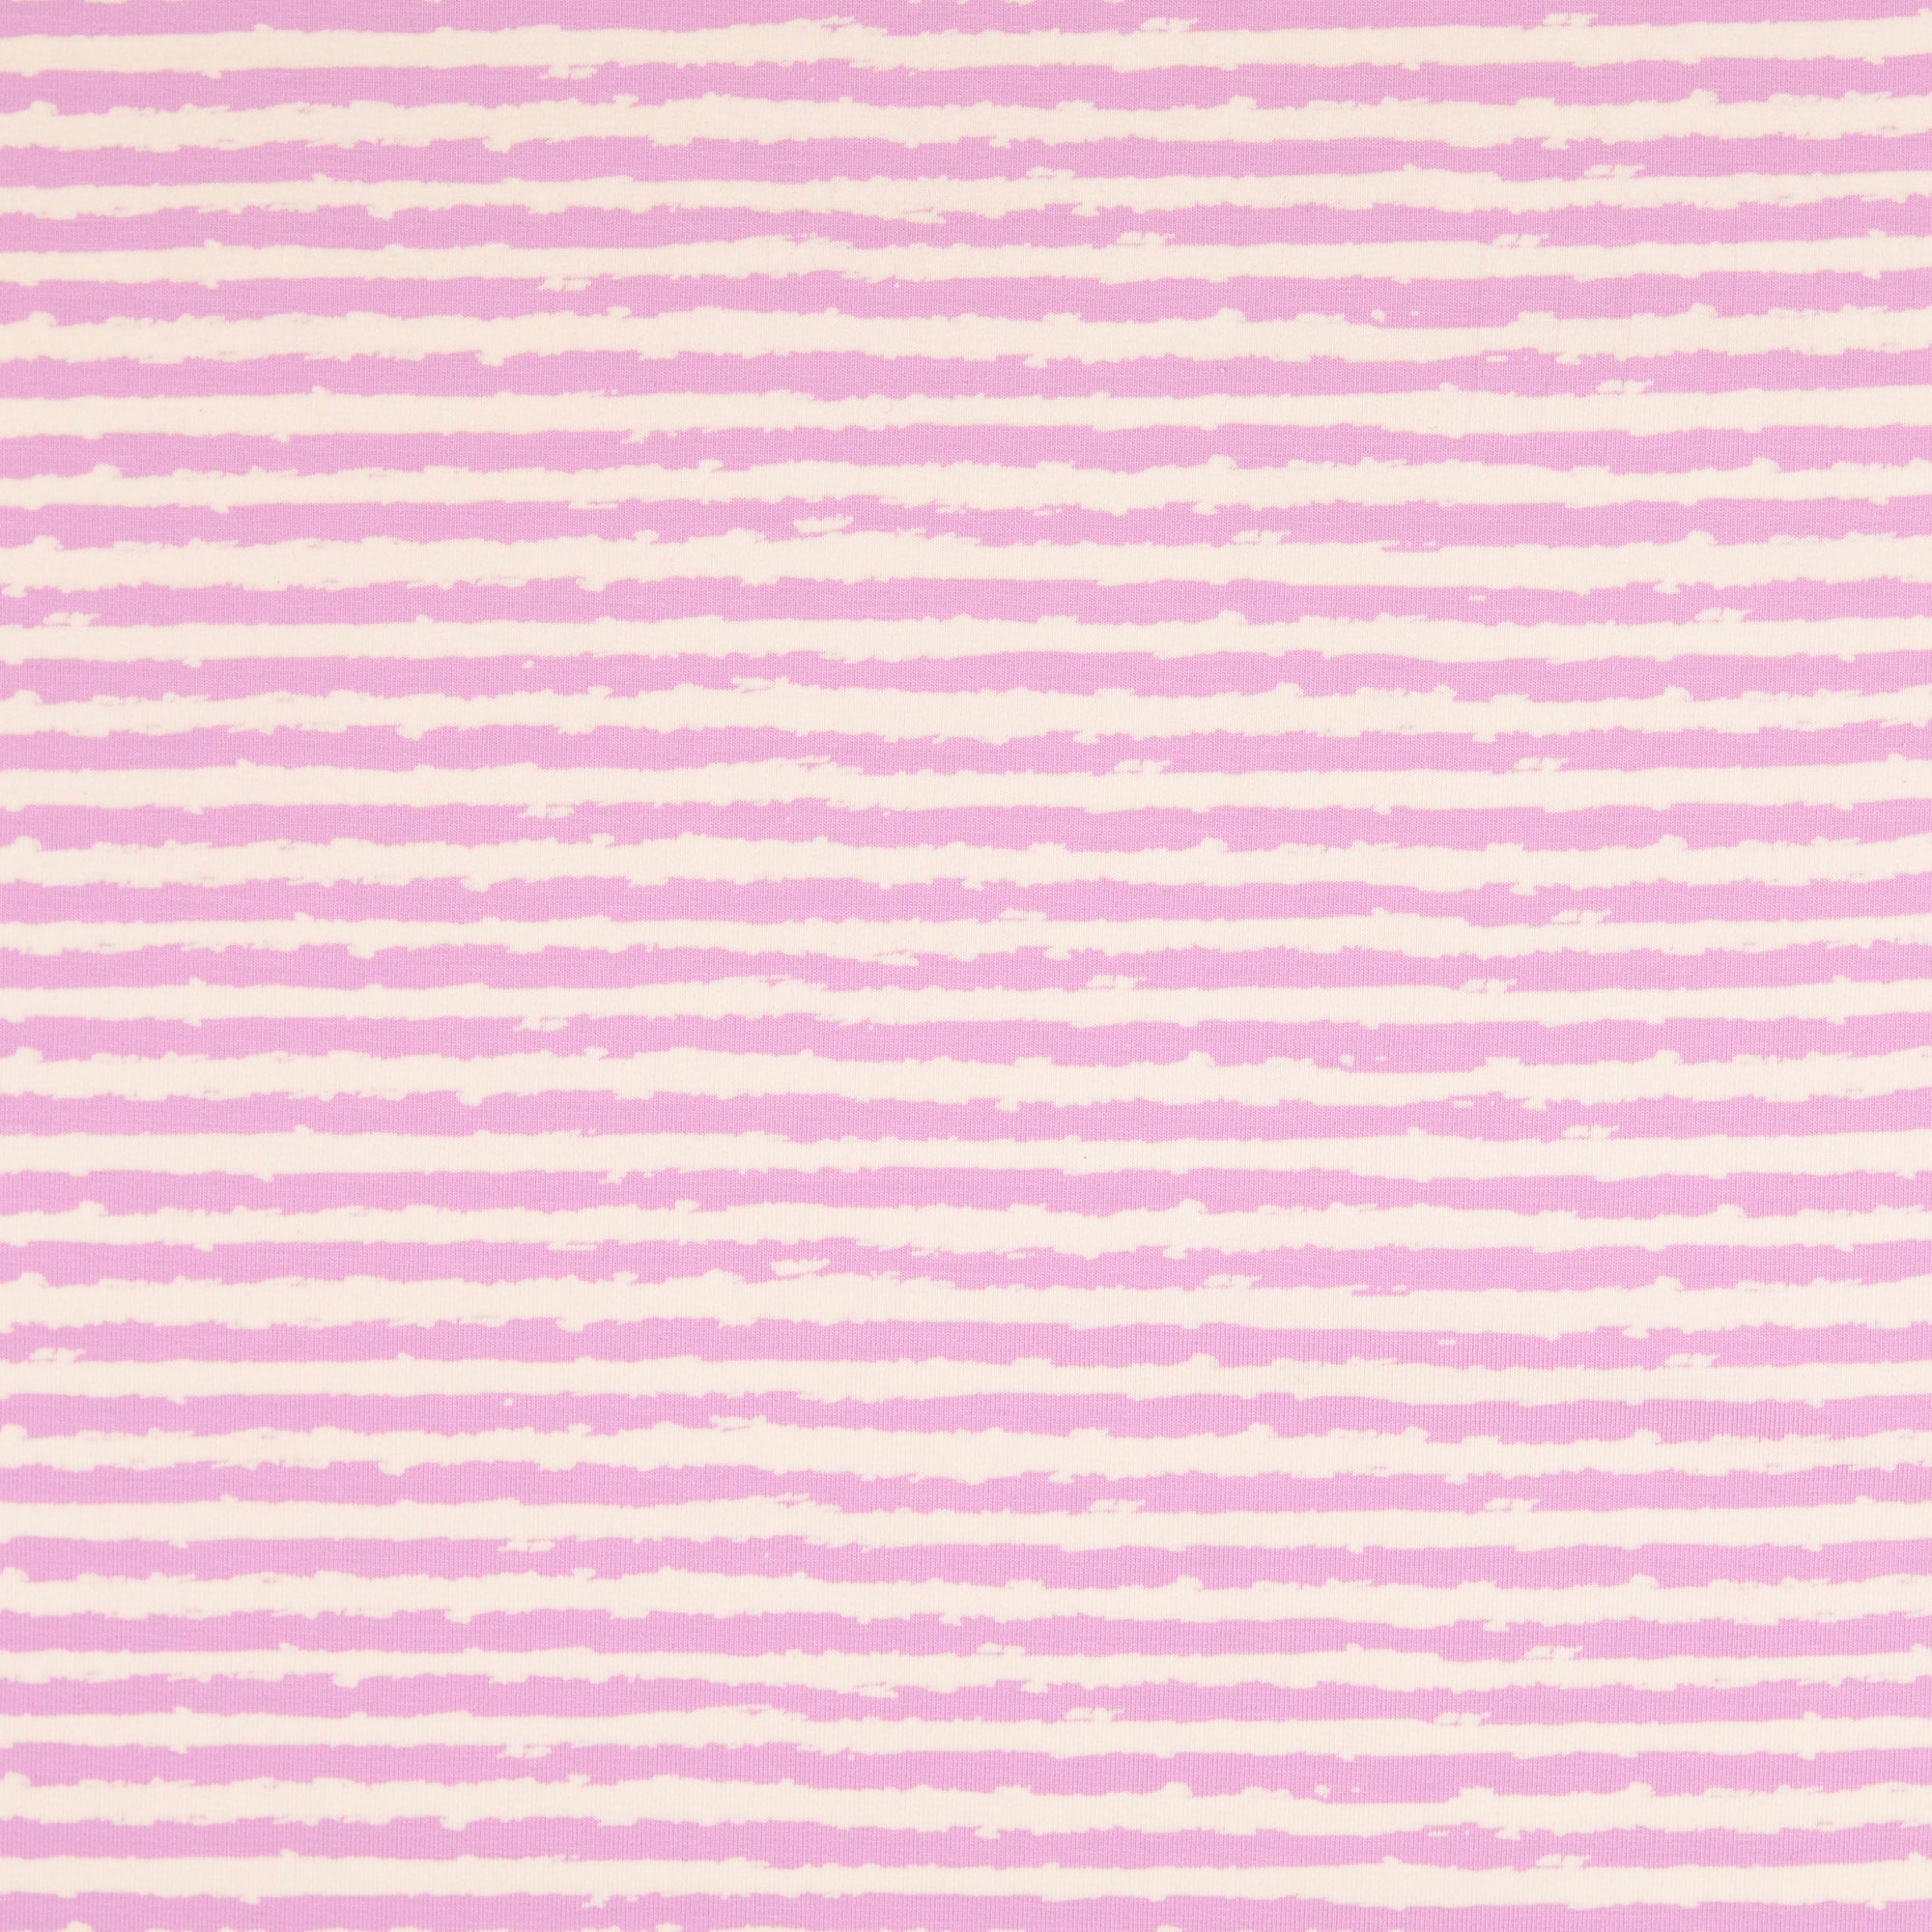 REMNANT 1.67 Metres - Hazy Thick Stripes Lilac Cotton Jersey Fabric